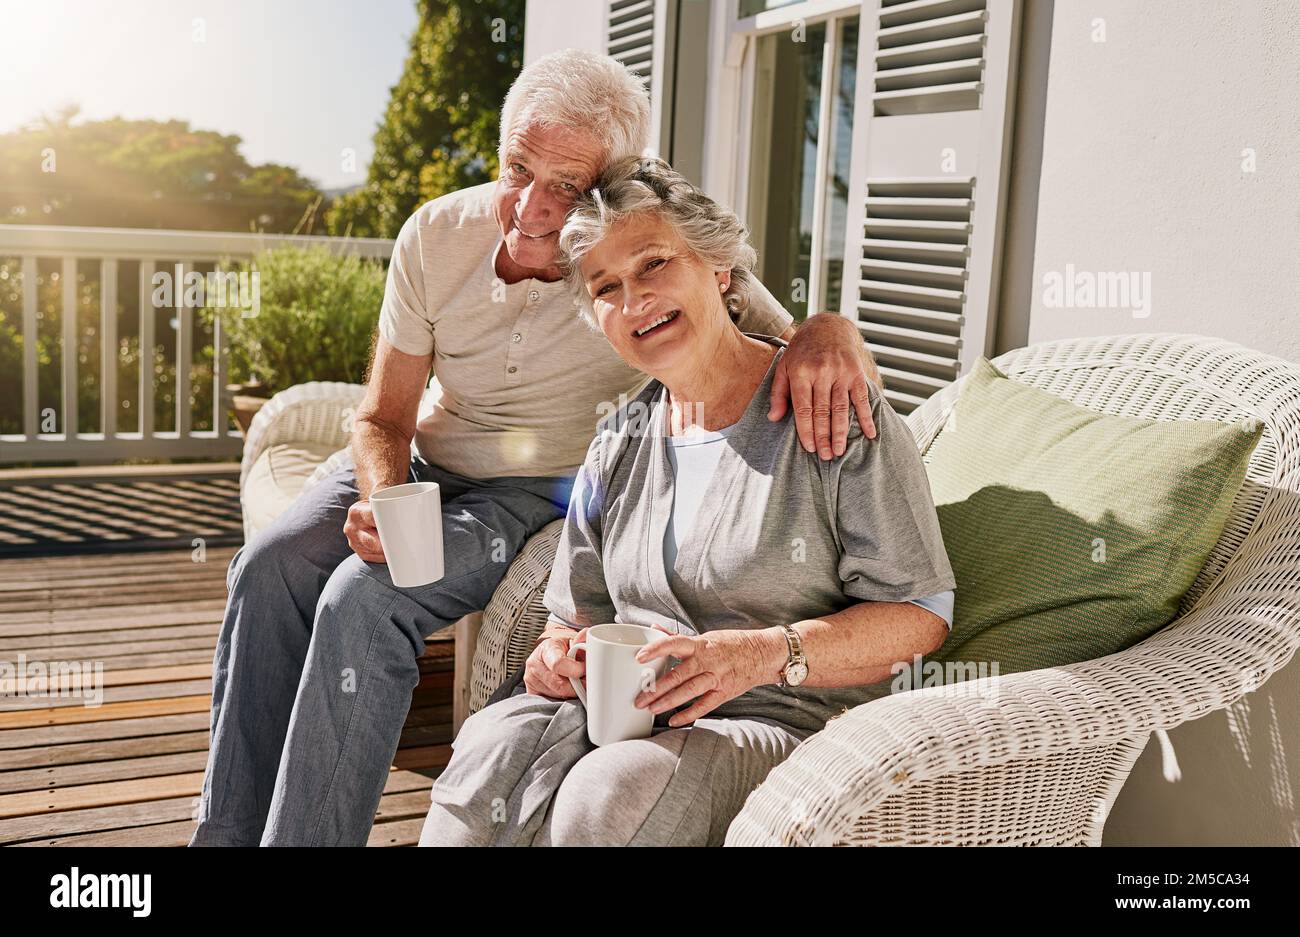 Making our retirement a comfortable one. a happy senior couple enjoying their morning coffee on the patio at home. Stock Photo